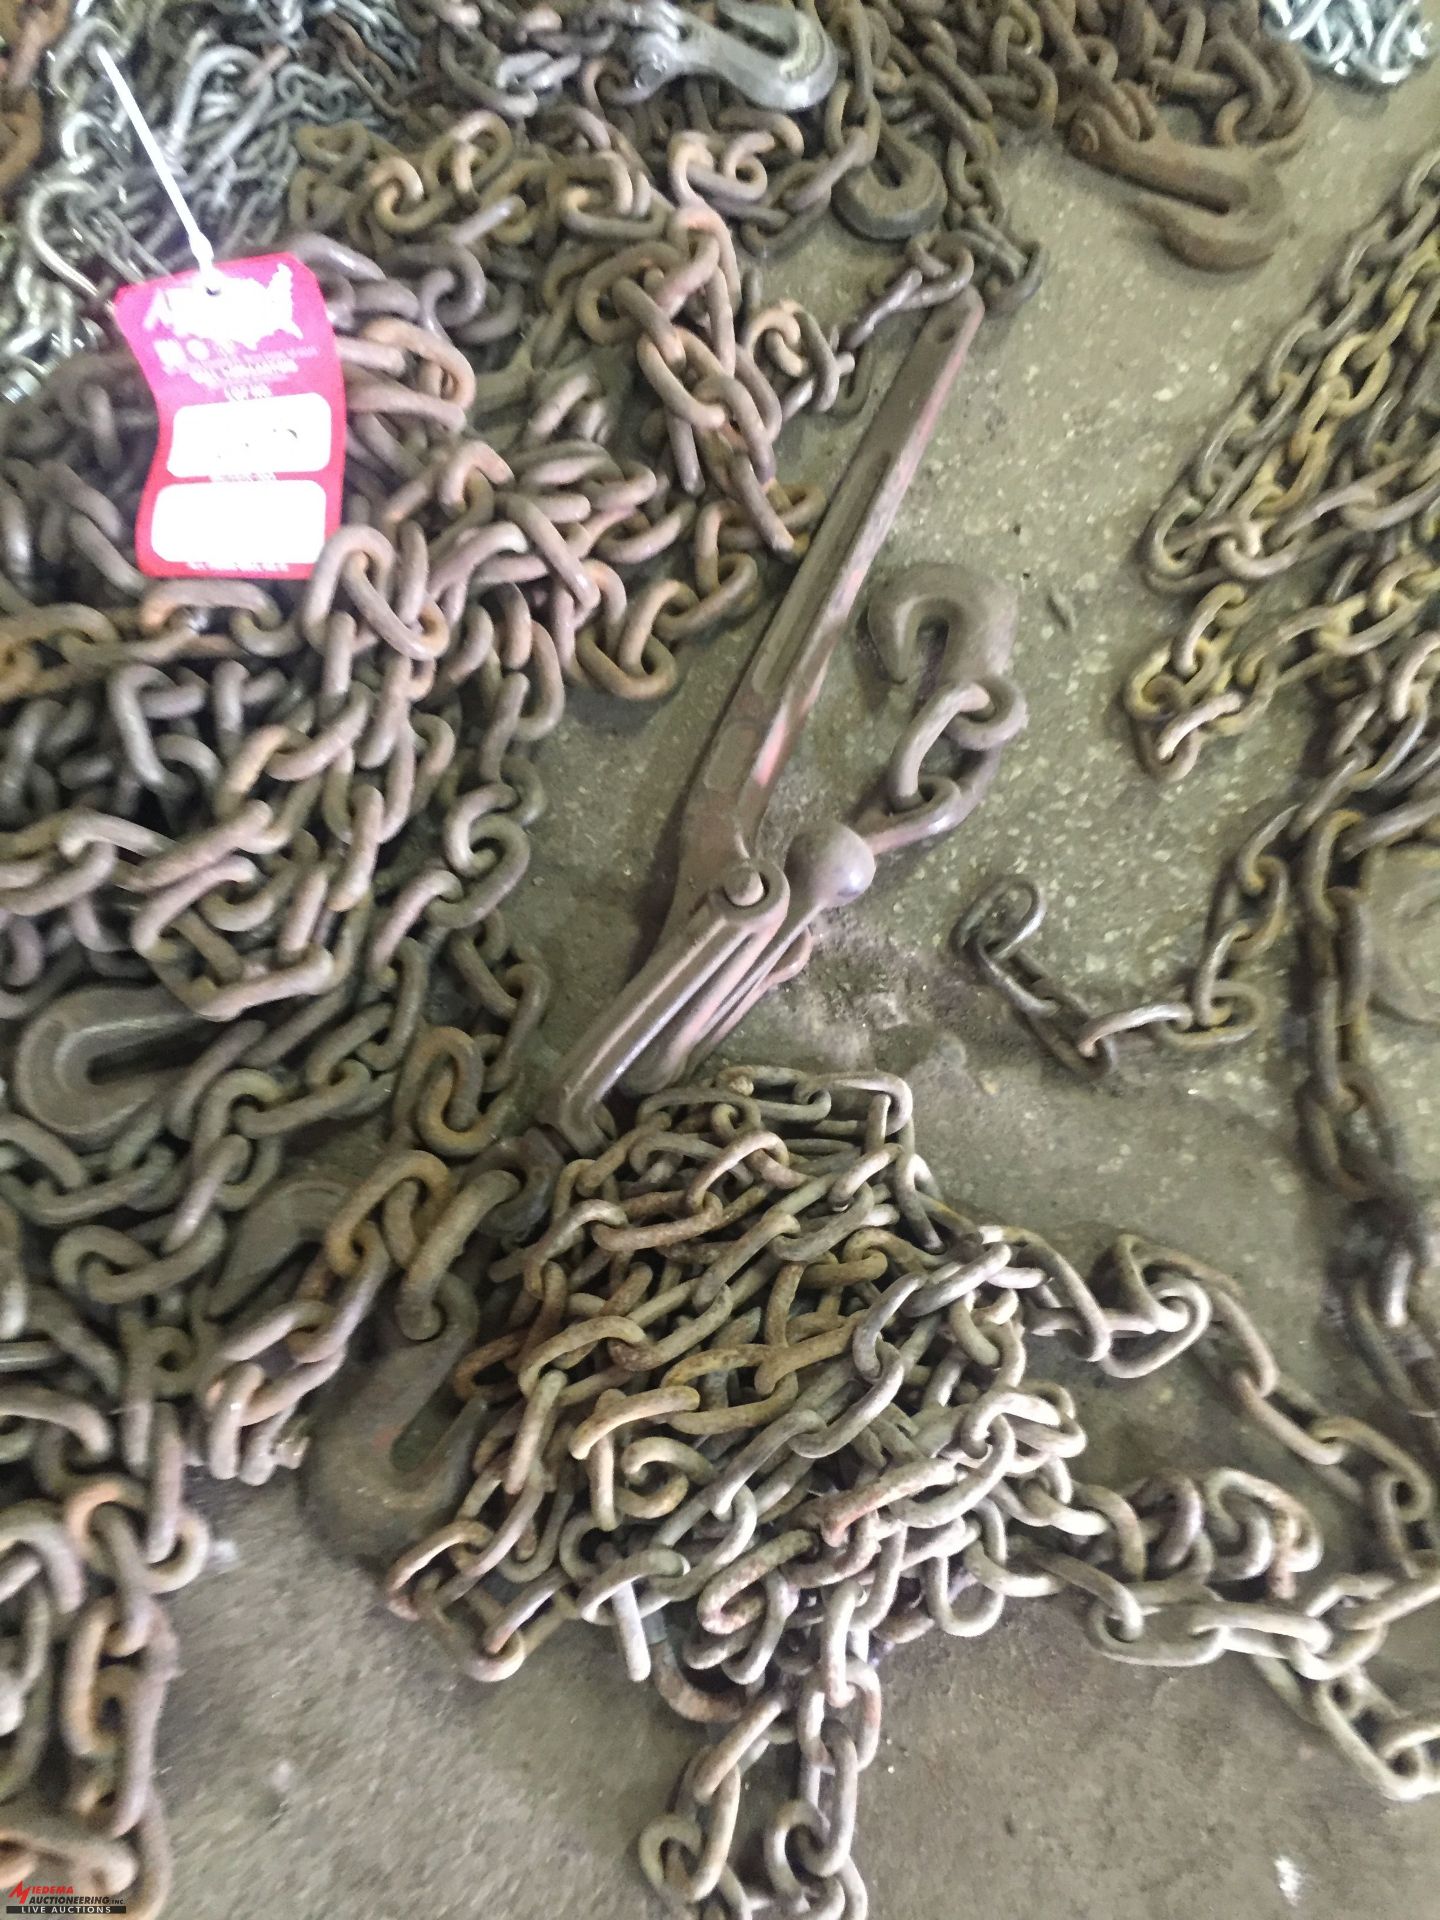 ASSORTED LINK CHAIN, CHAIN BINDERS, COME-A-LONG [LOCATION: EAST WINANS STREET LOCATION] - Image 2 of 4